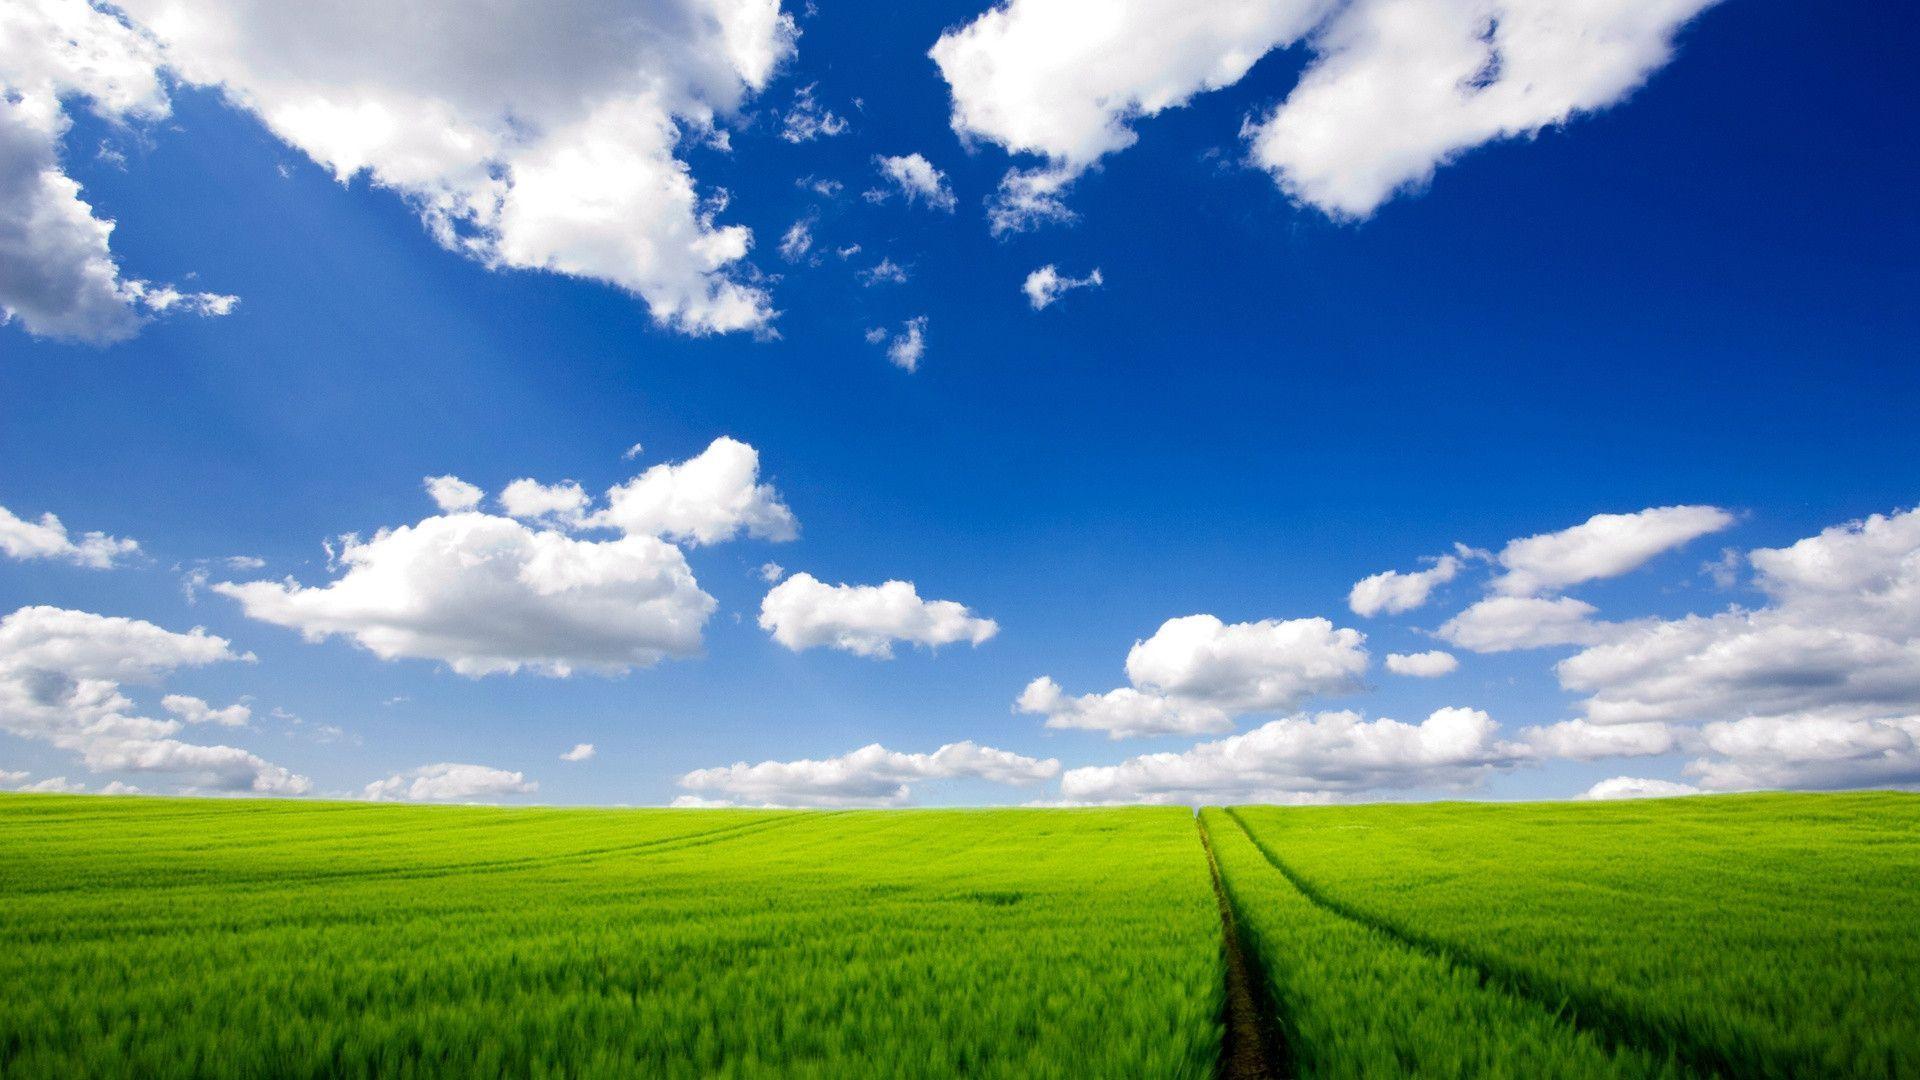 Download 45 Hd Windows Xp Wallpapers For Free - Windows Xp Wallpapers Full  Hd - 1920x1080 Wallpaper 